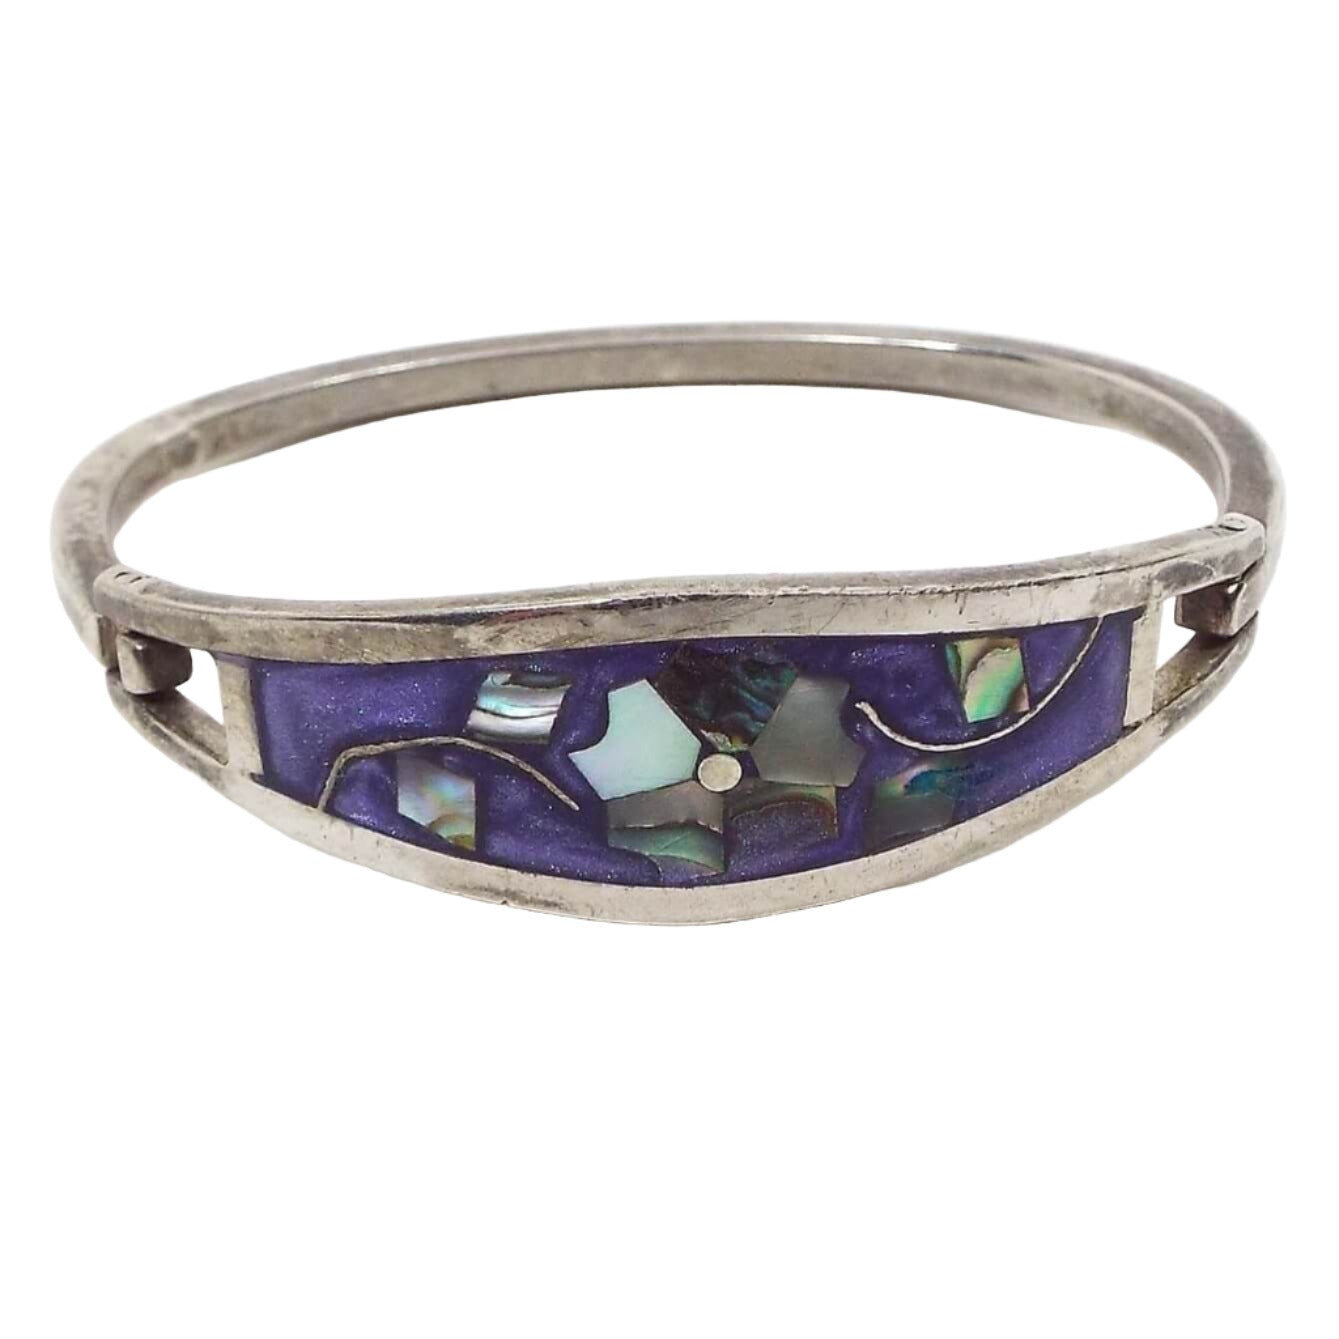 Angled front and top view of the retro vintage Taxco hinged floral bangle bracelet. The metal is silver tone in color. There is a large curved area on top with pearly purple enamel. In the middle is a flower design that has pearly multi colored inlaid abalone shell for the petals and leaves. The back of the bracelet is a squared bar that curves around and is hinged on one side and has a hook on the other to open and close the bracelet.